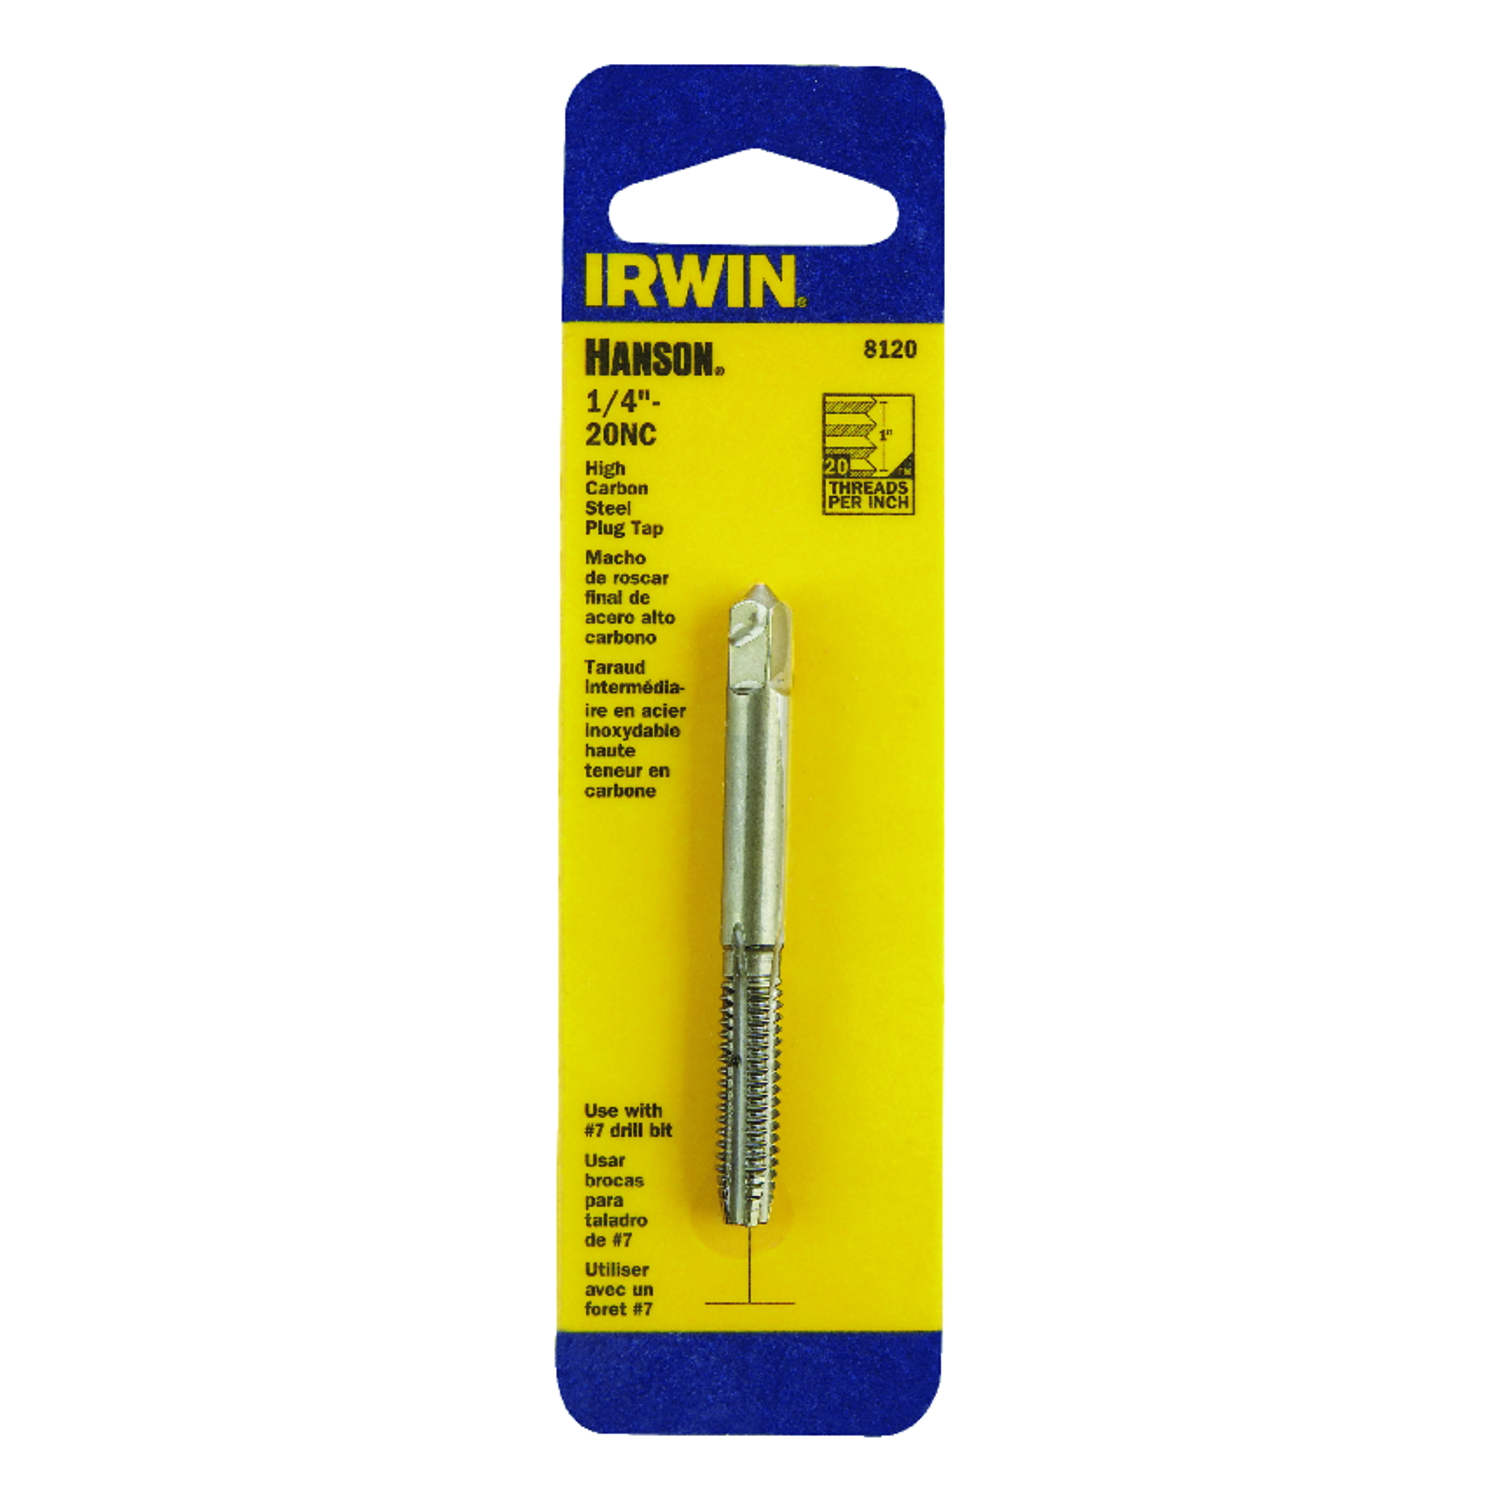 Irwin Hanson High Carbon Steel SAE Fraction Tap 1/4 in. 1 pc